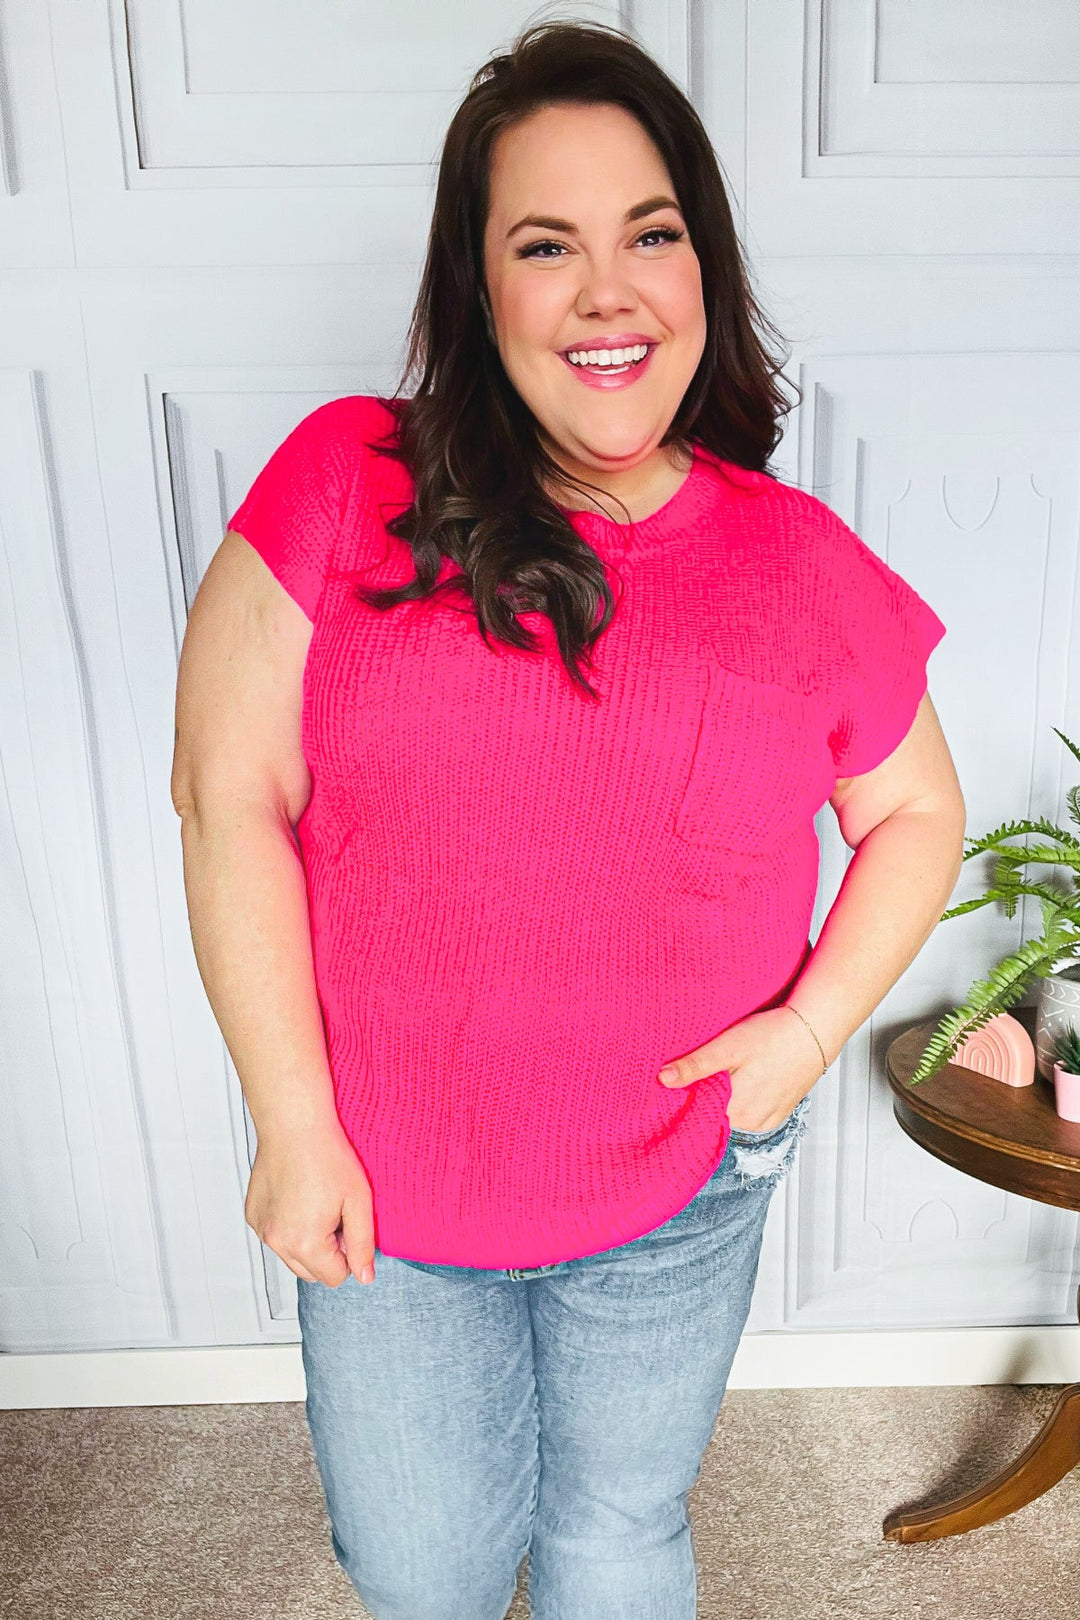 Call On Me - Dolman Ribbed Sweater Top - Hot Pink